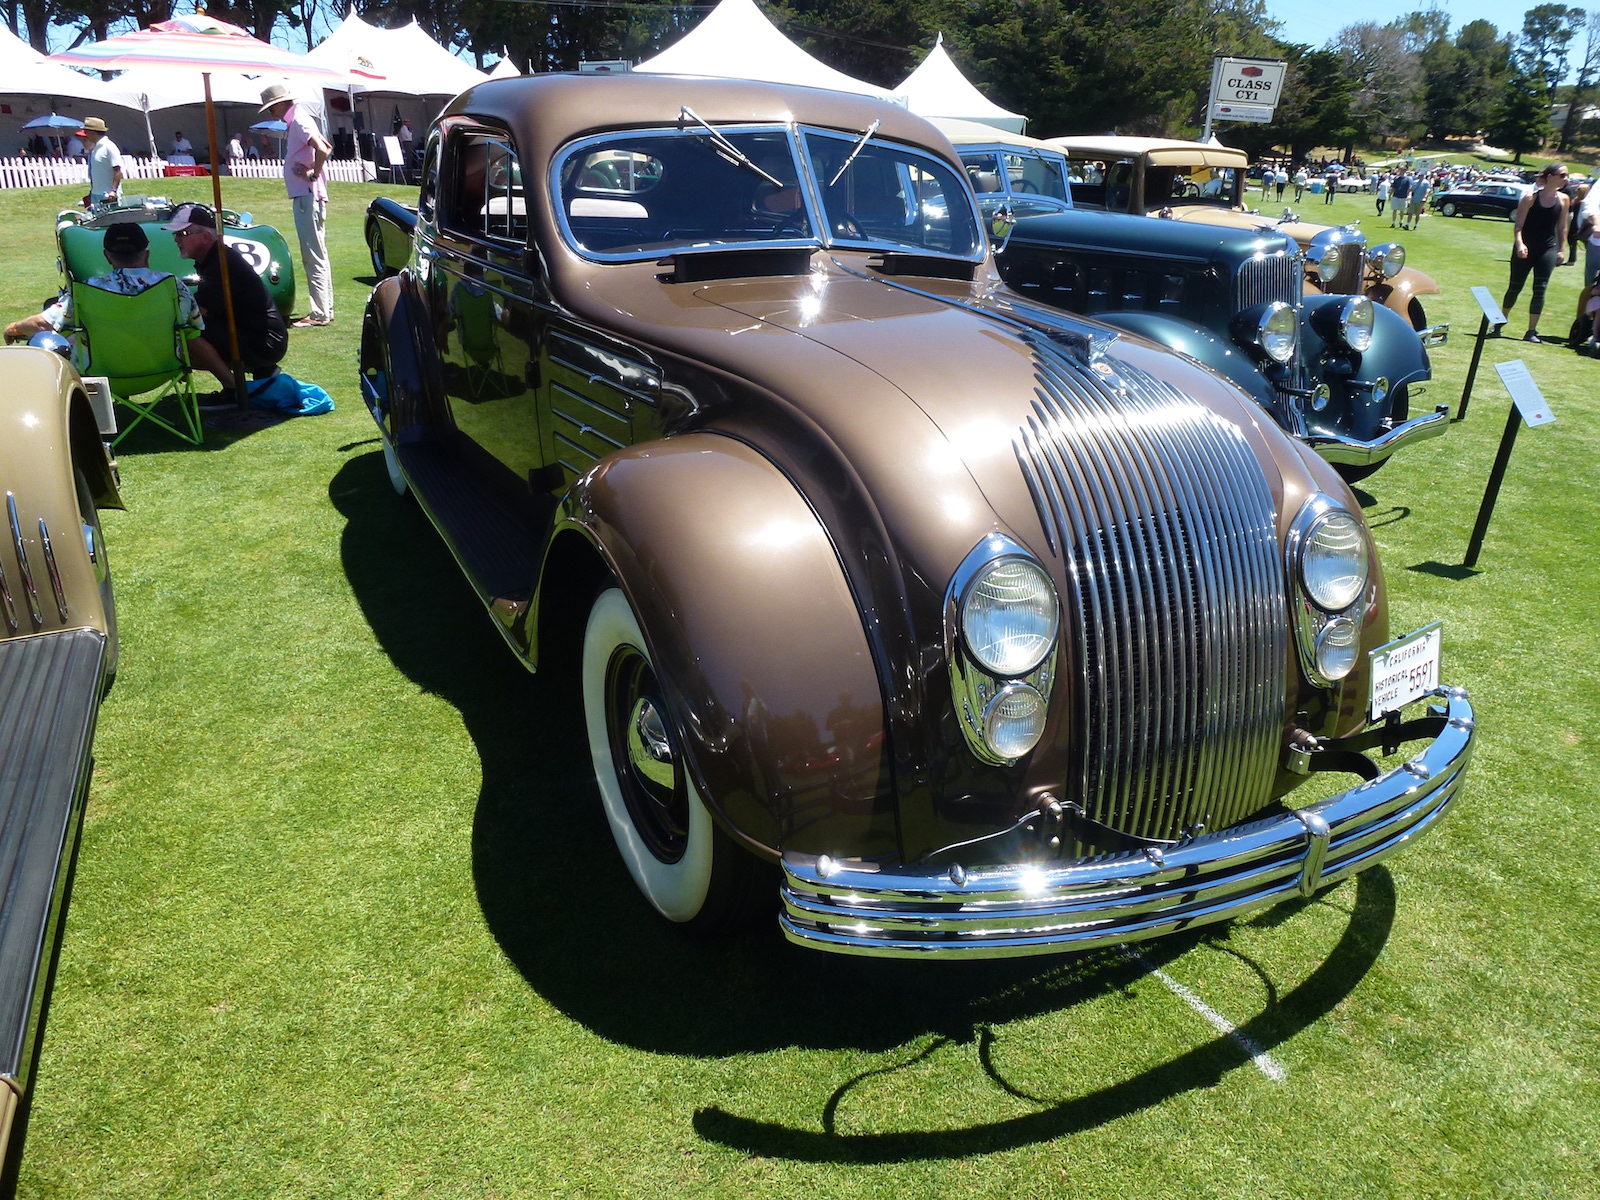 The Chrysler Airflow - Way Ahead Of Its Time